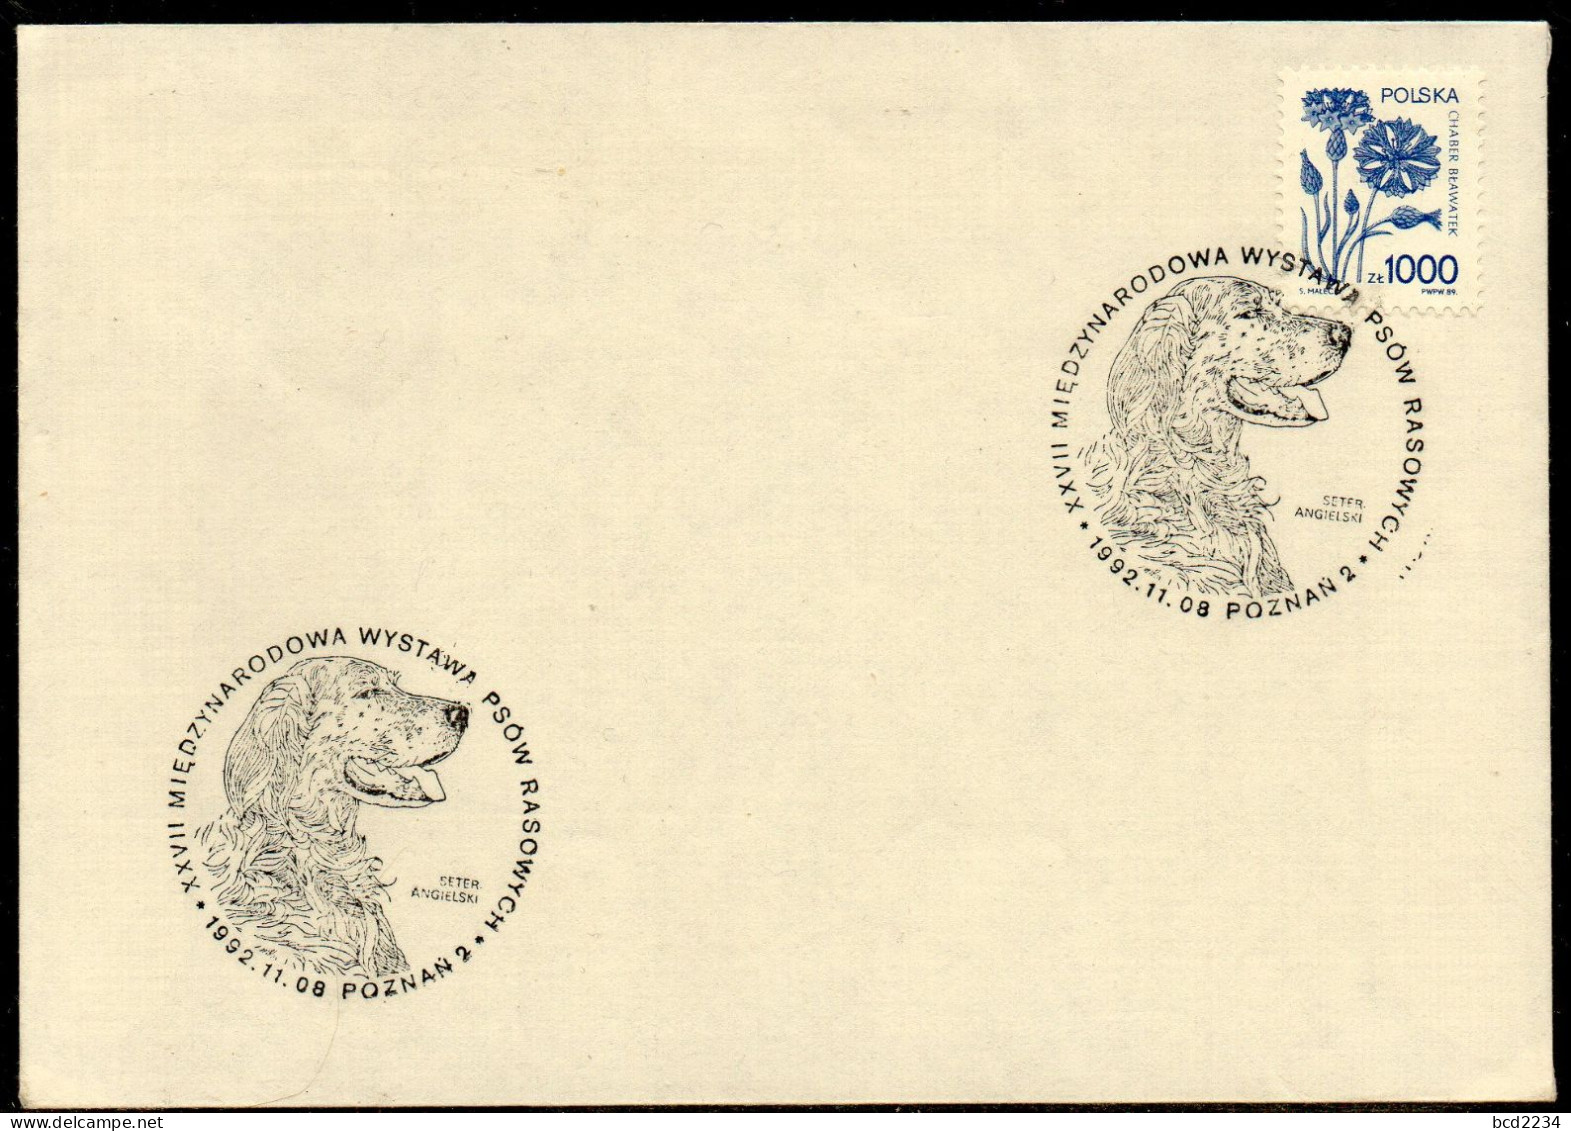 POLAND 1992 XXVII INTERNATIONAL PEDIGREE DOG SHOW POZNAN SPECIAL CANCEL ON COVER DOGS DOG ENGLISH SETTER - Chiens